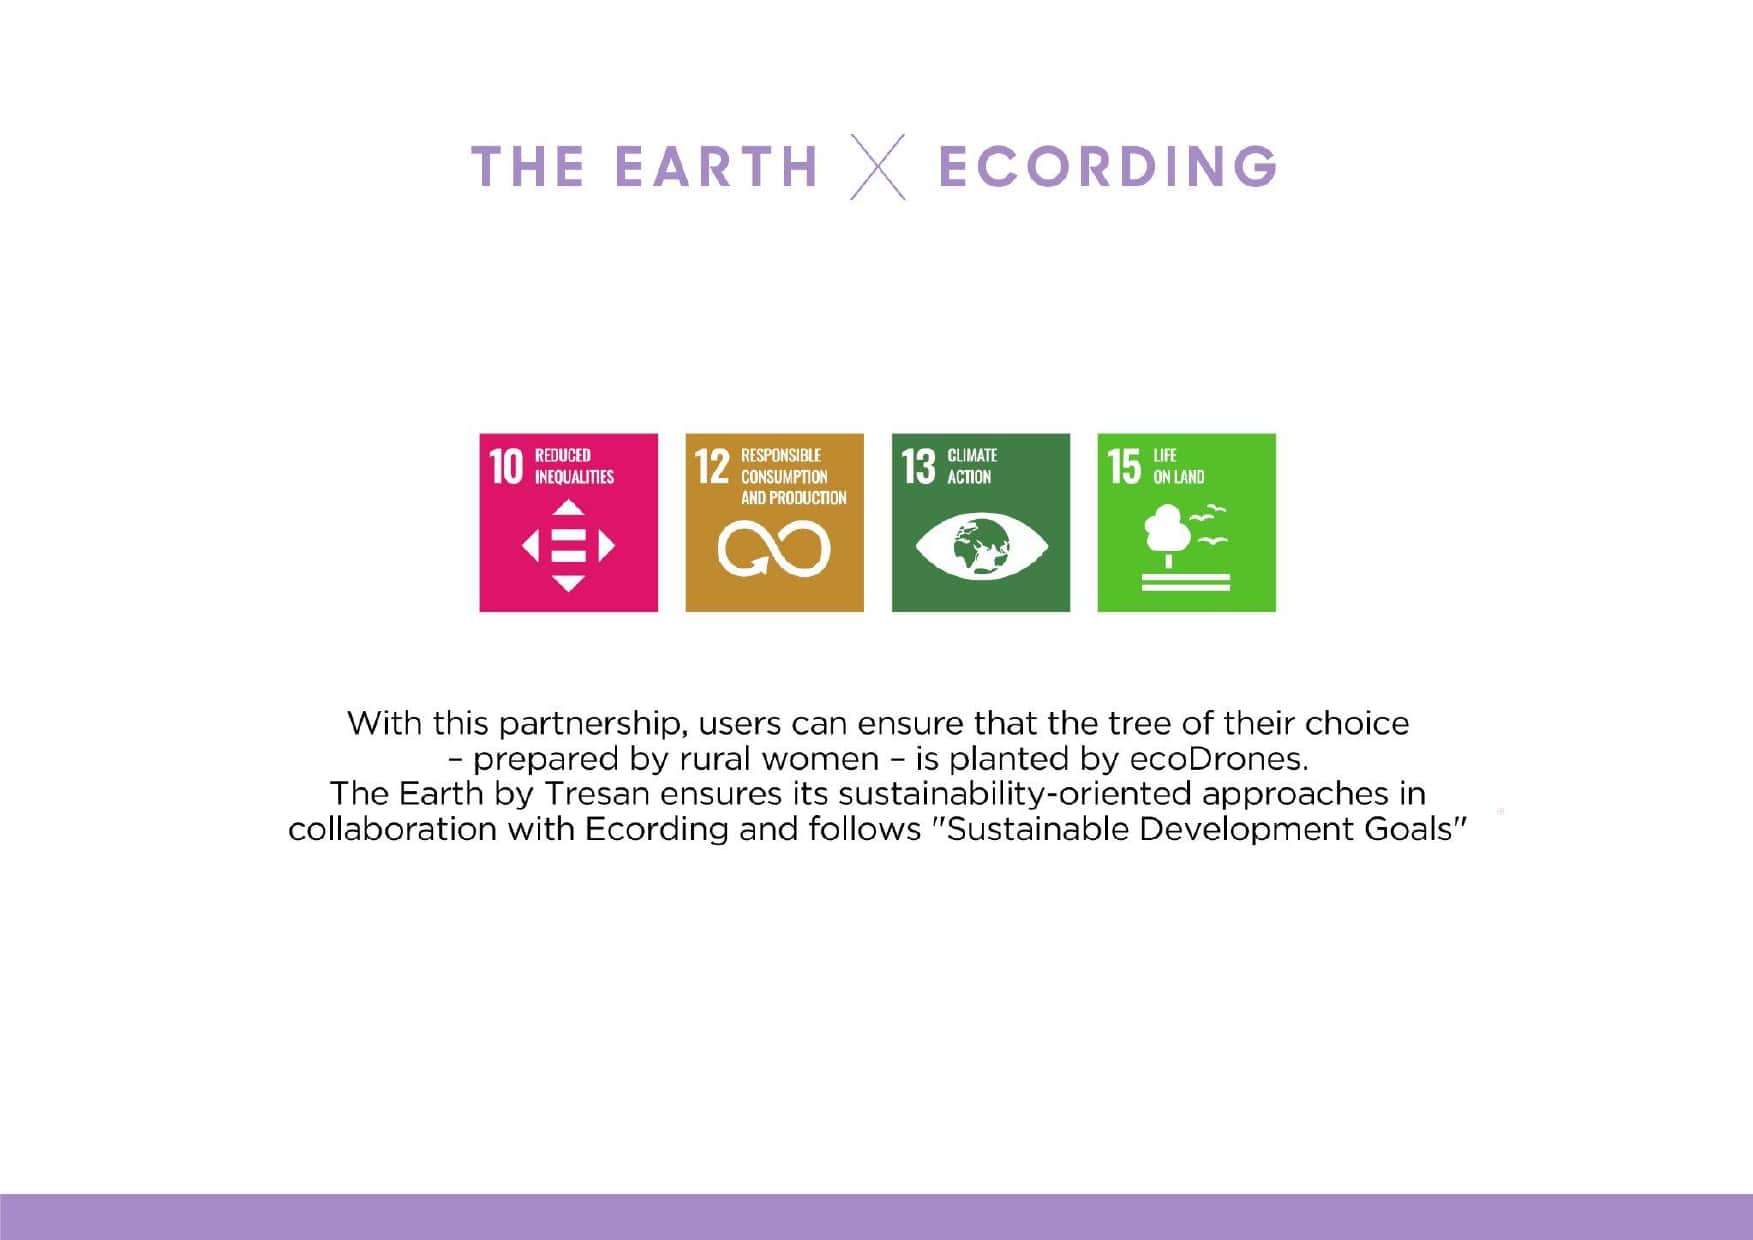 The Earth by Tresan Presentation 2022_page-0006-min